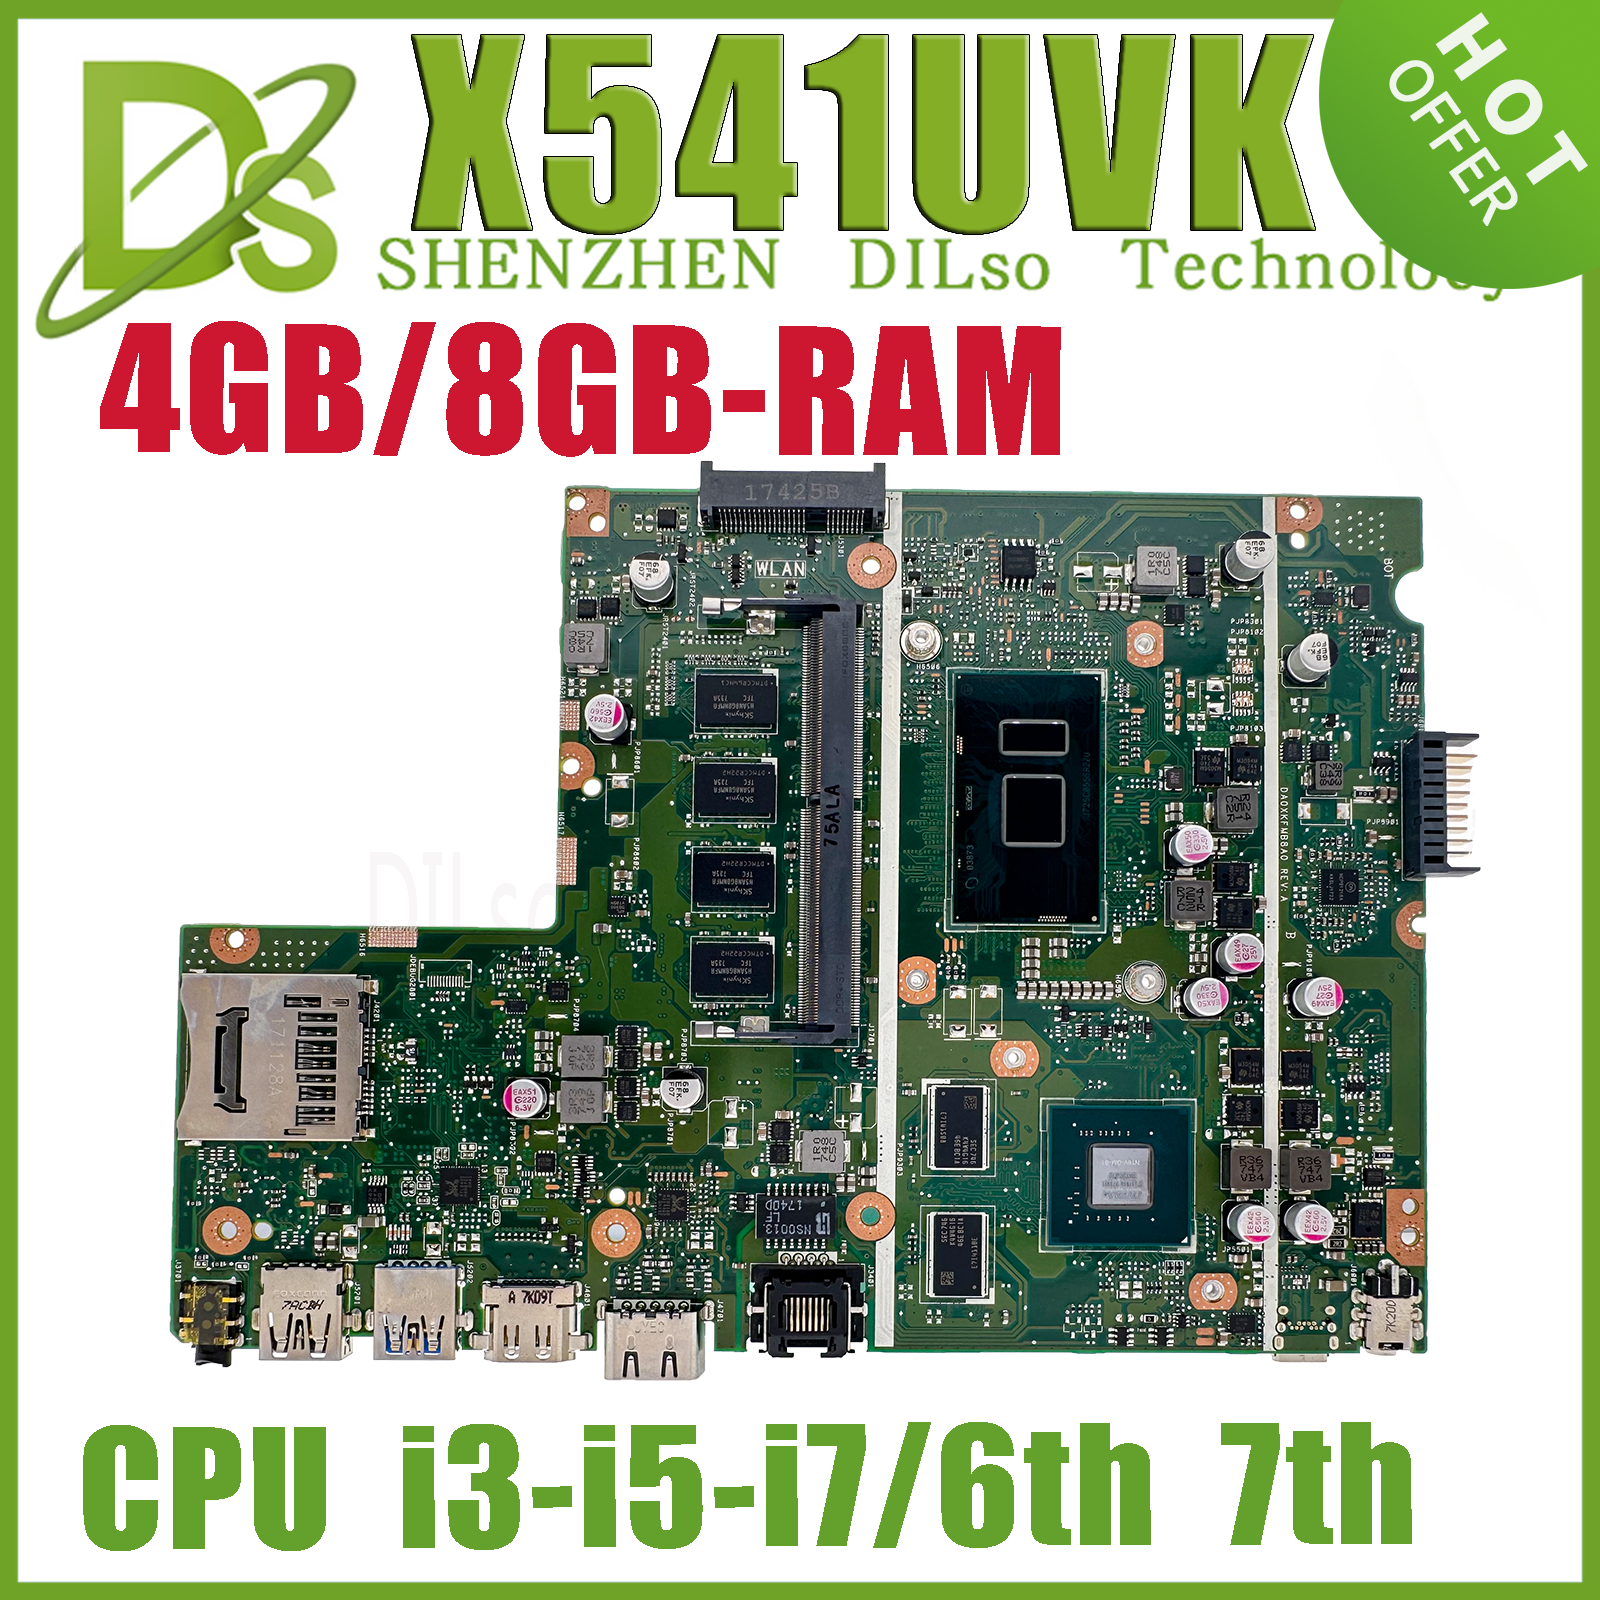 PLACA X541UV Mainboard For ASUS X541U X541UJ A541U X541UVK K541U Laptop Motherboard With 4GB 8G I3-6TH I5 I7 GT920M 100% Working